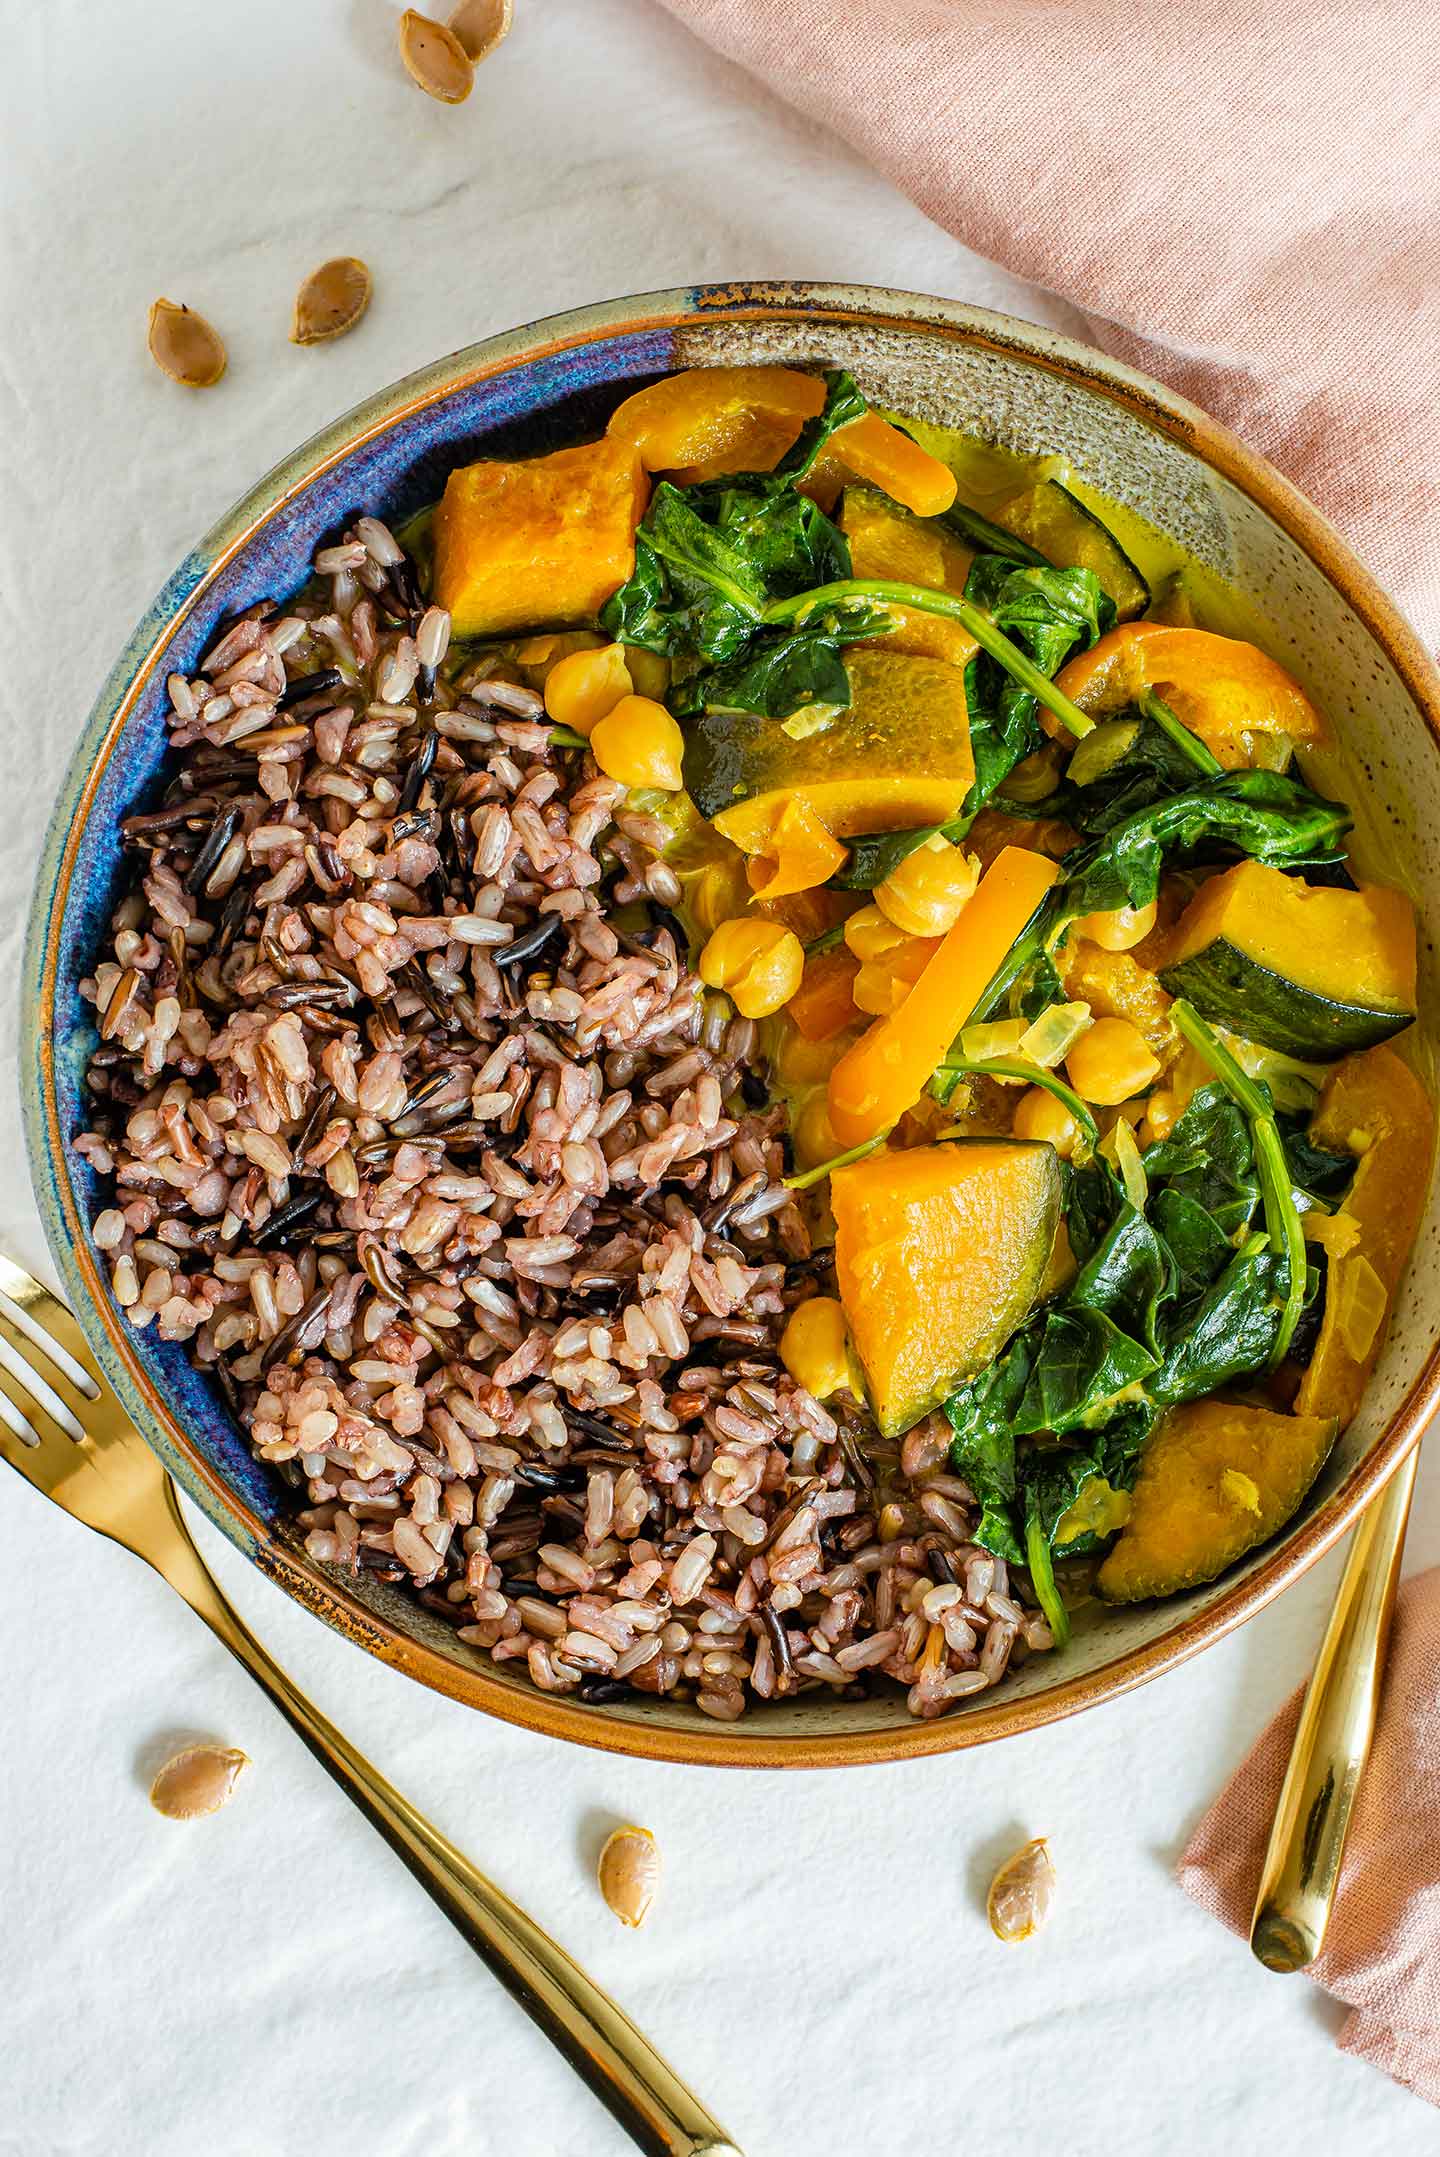 Top down view of a creamy curry with chunks of kabocha squash, chickpeas, and spinach in a bowl with a side of wild rice.